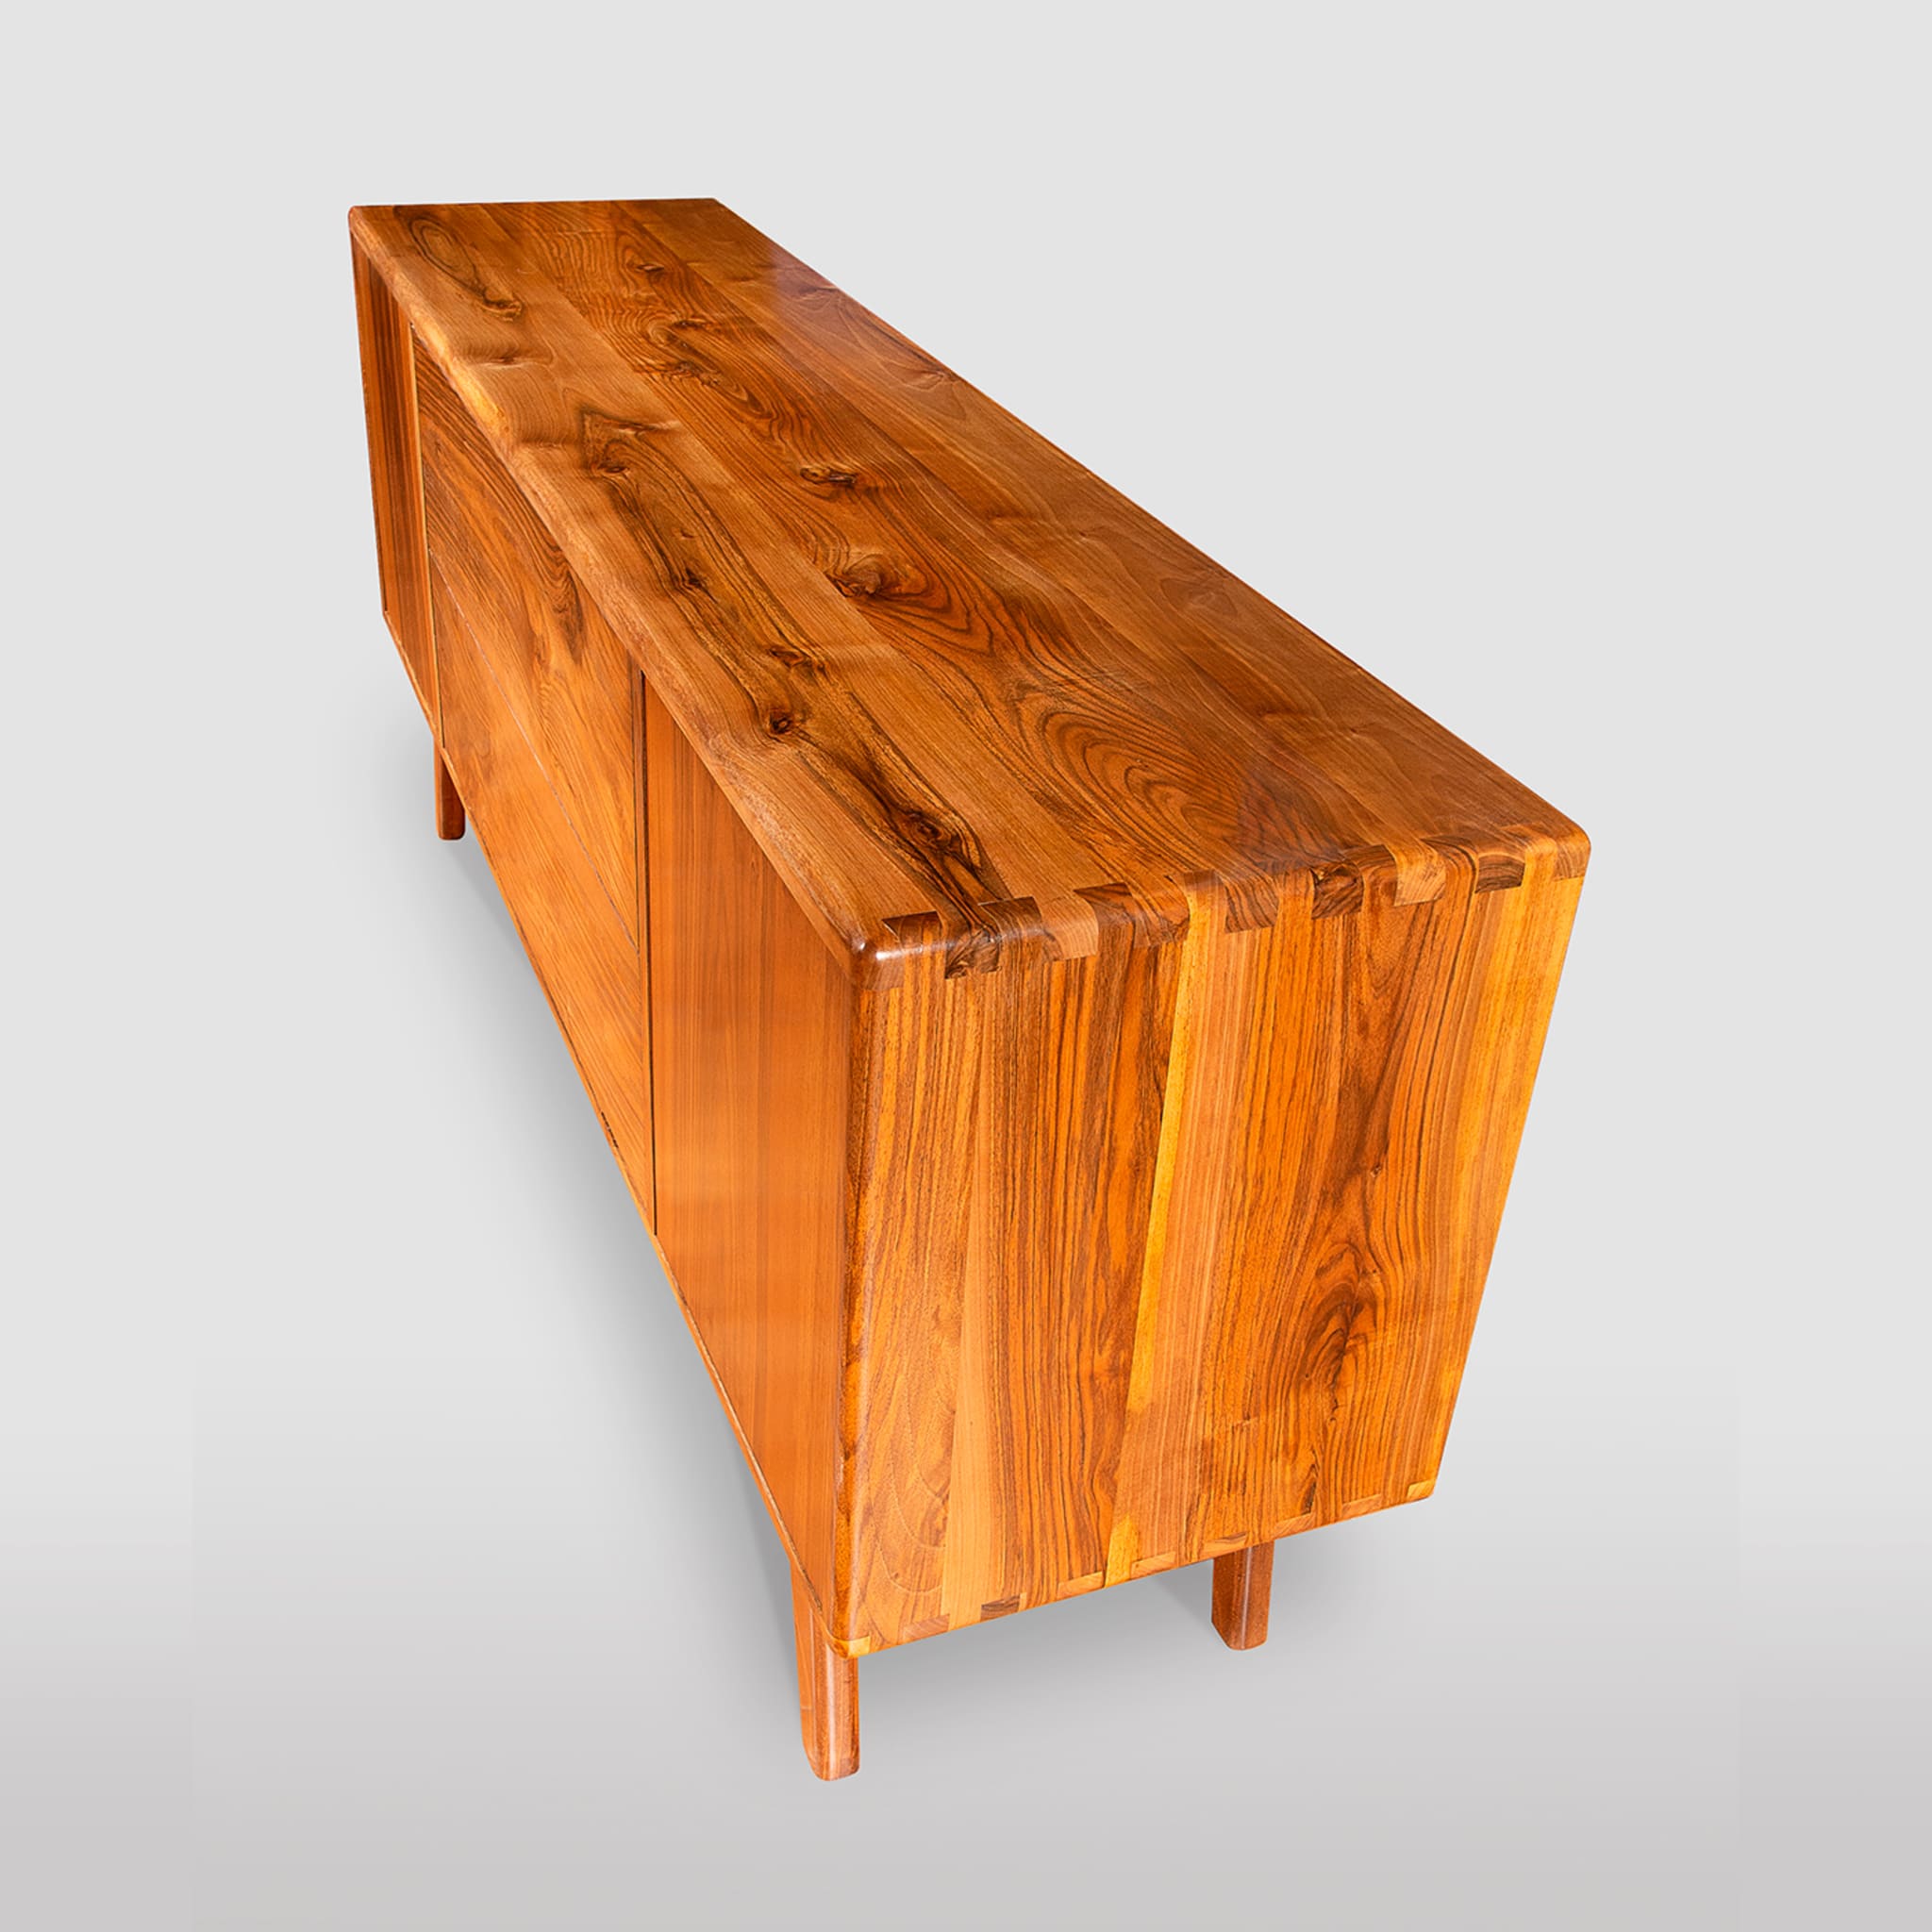 Dovetail Sideboard by Eugenio Gambella - Alternative view 3